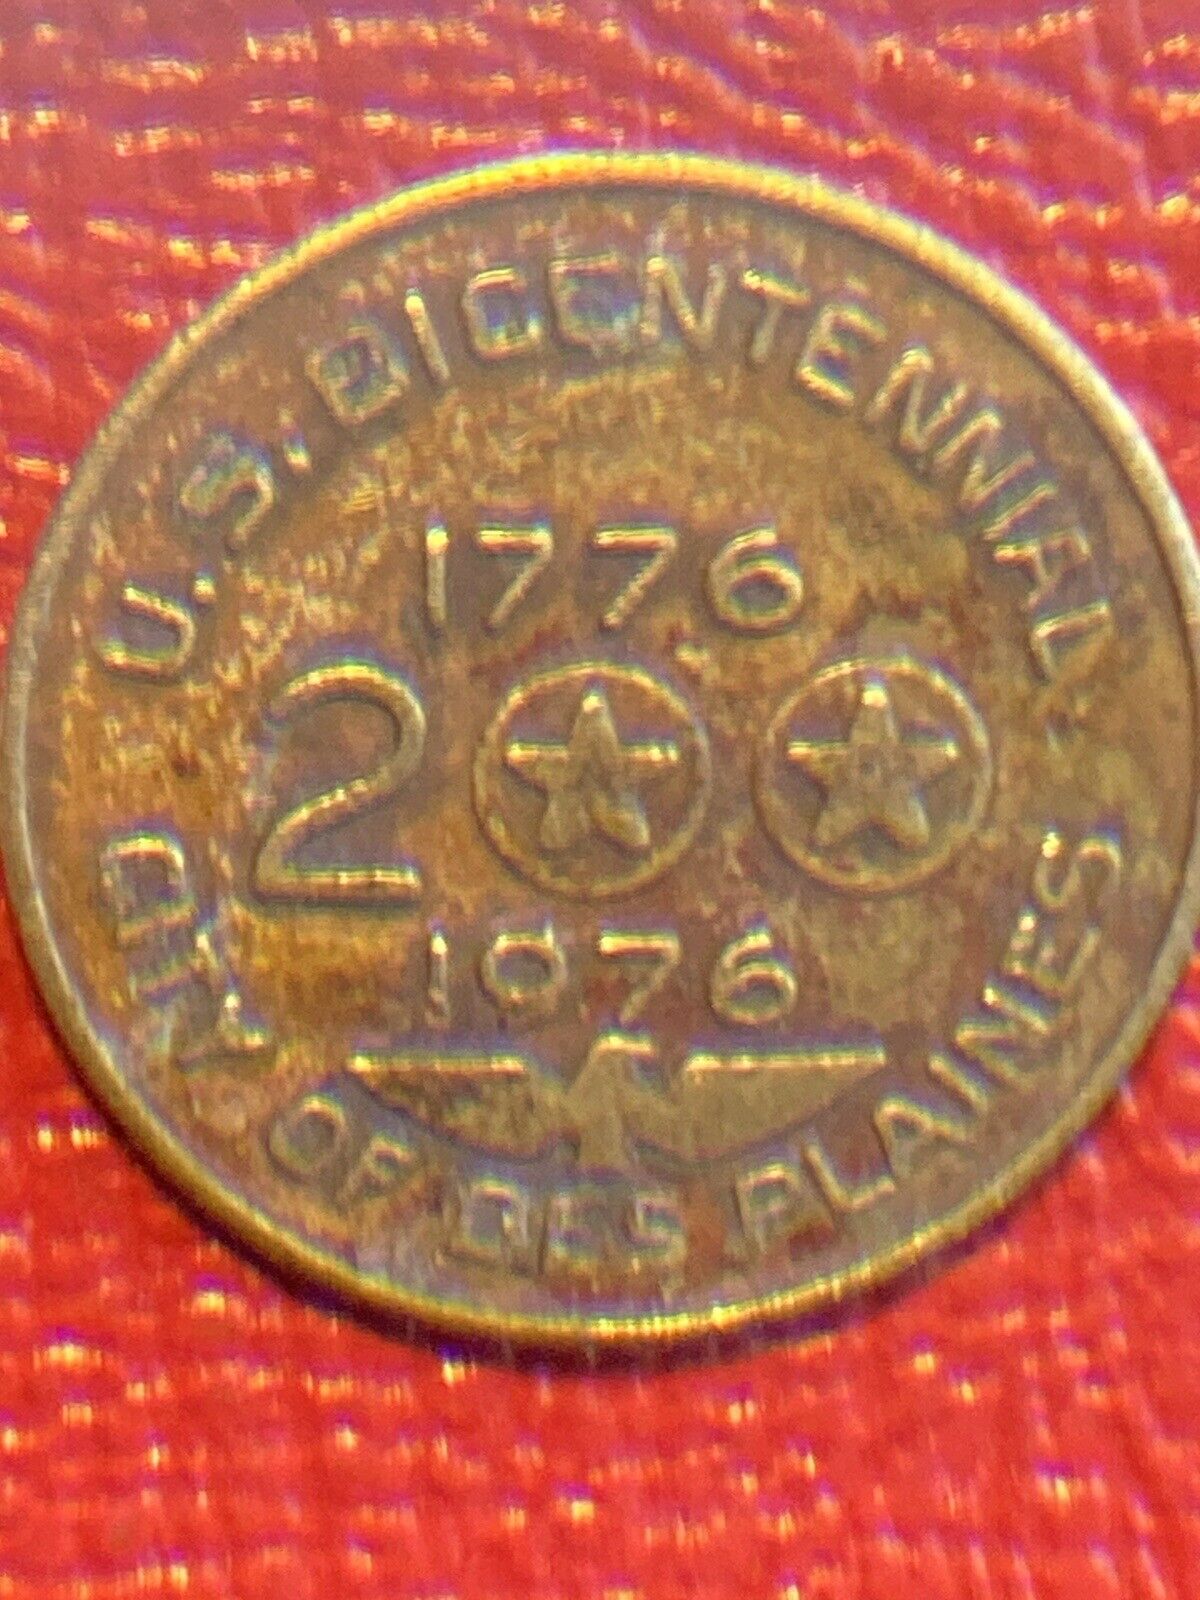 1976 2OOTH ANNIVERSARY 1776 TOKEN City of Des Plaines IL parking US BICENTENNIAL